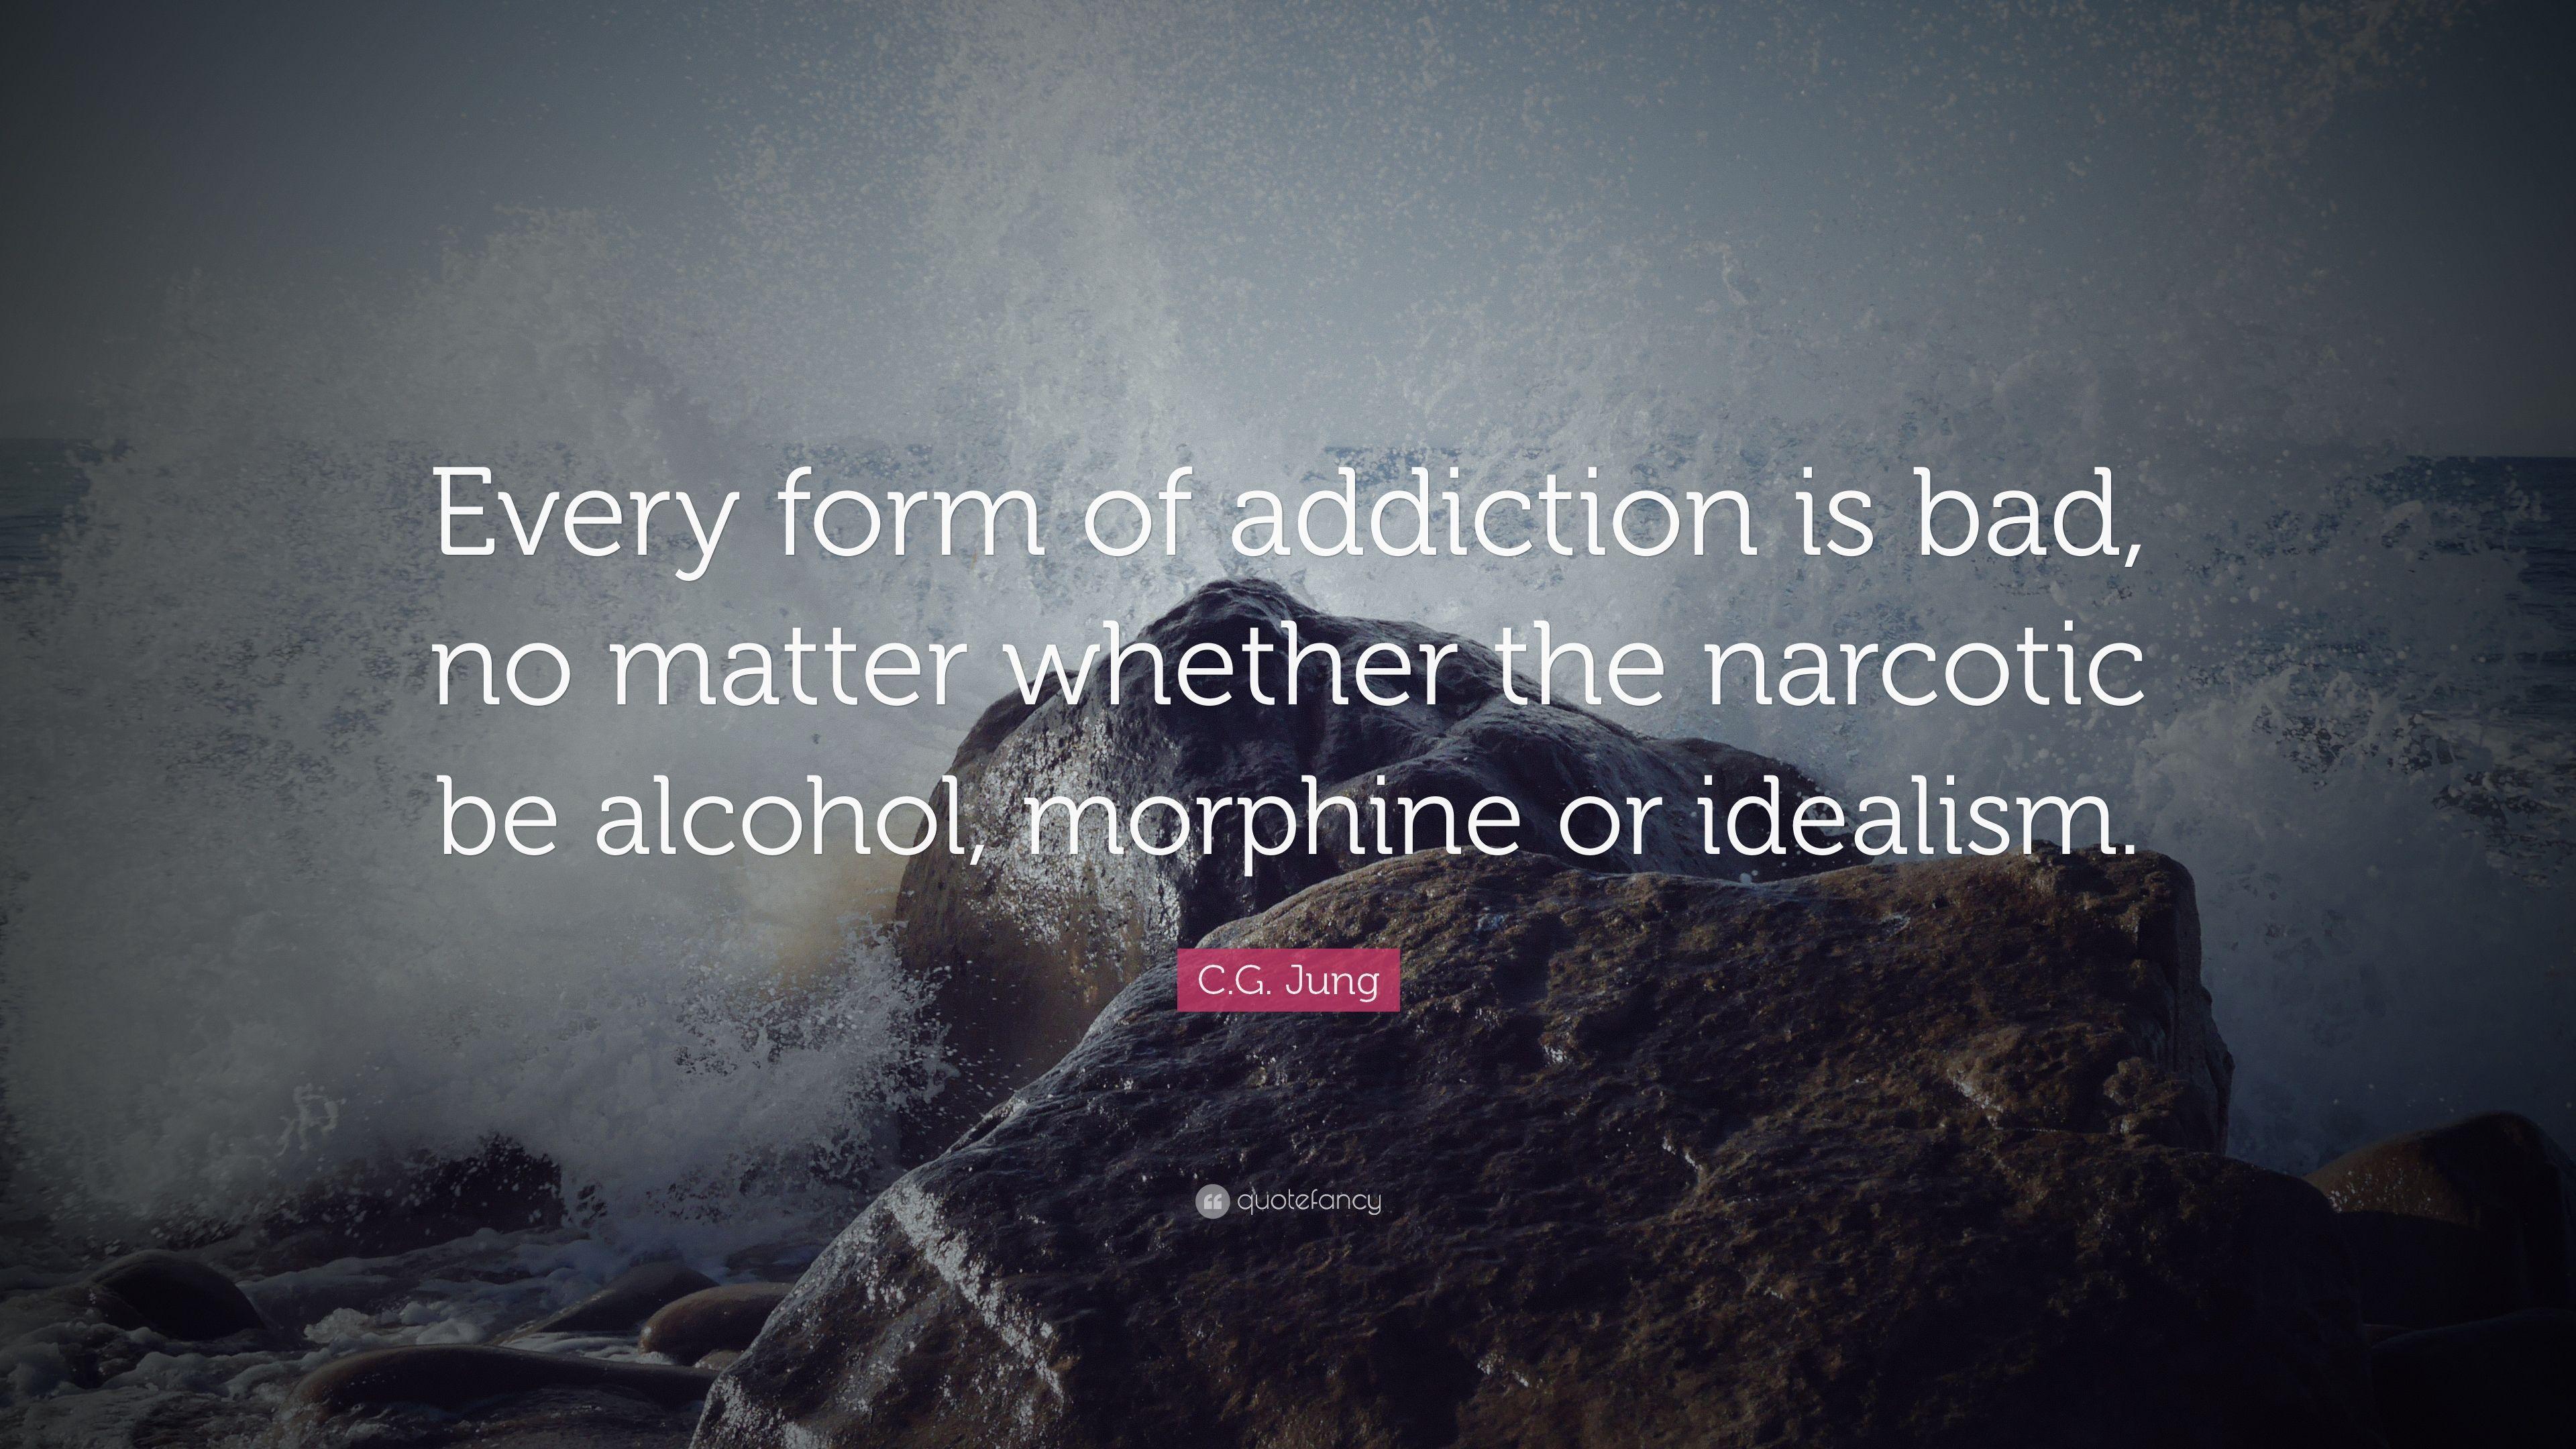 C.G. Jung Quote: “Every form of addiction is bad, no matter whether